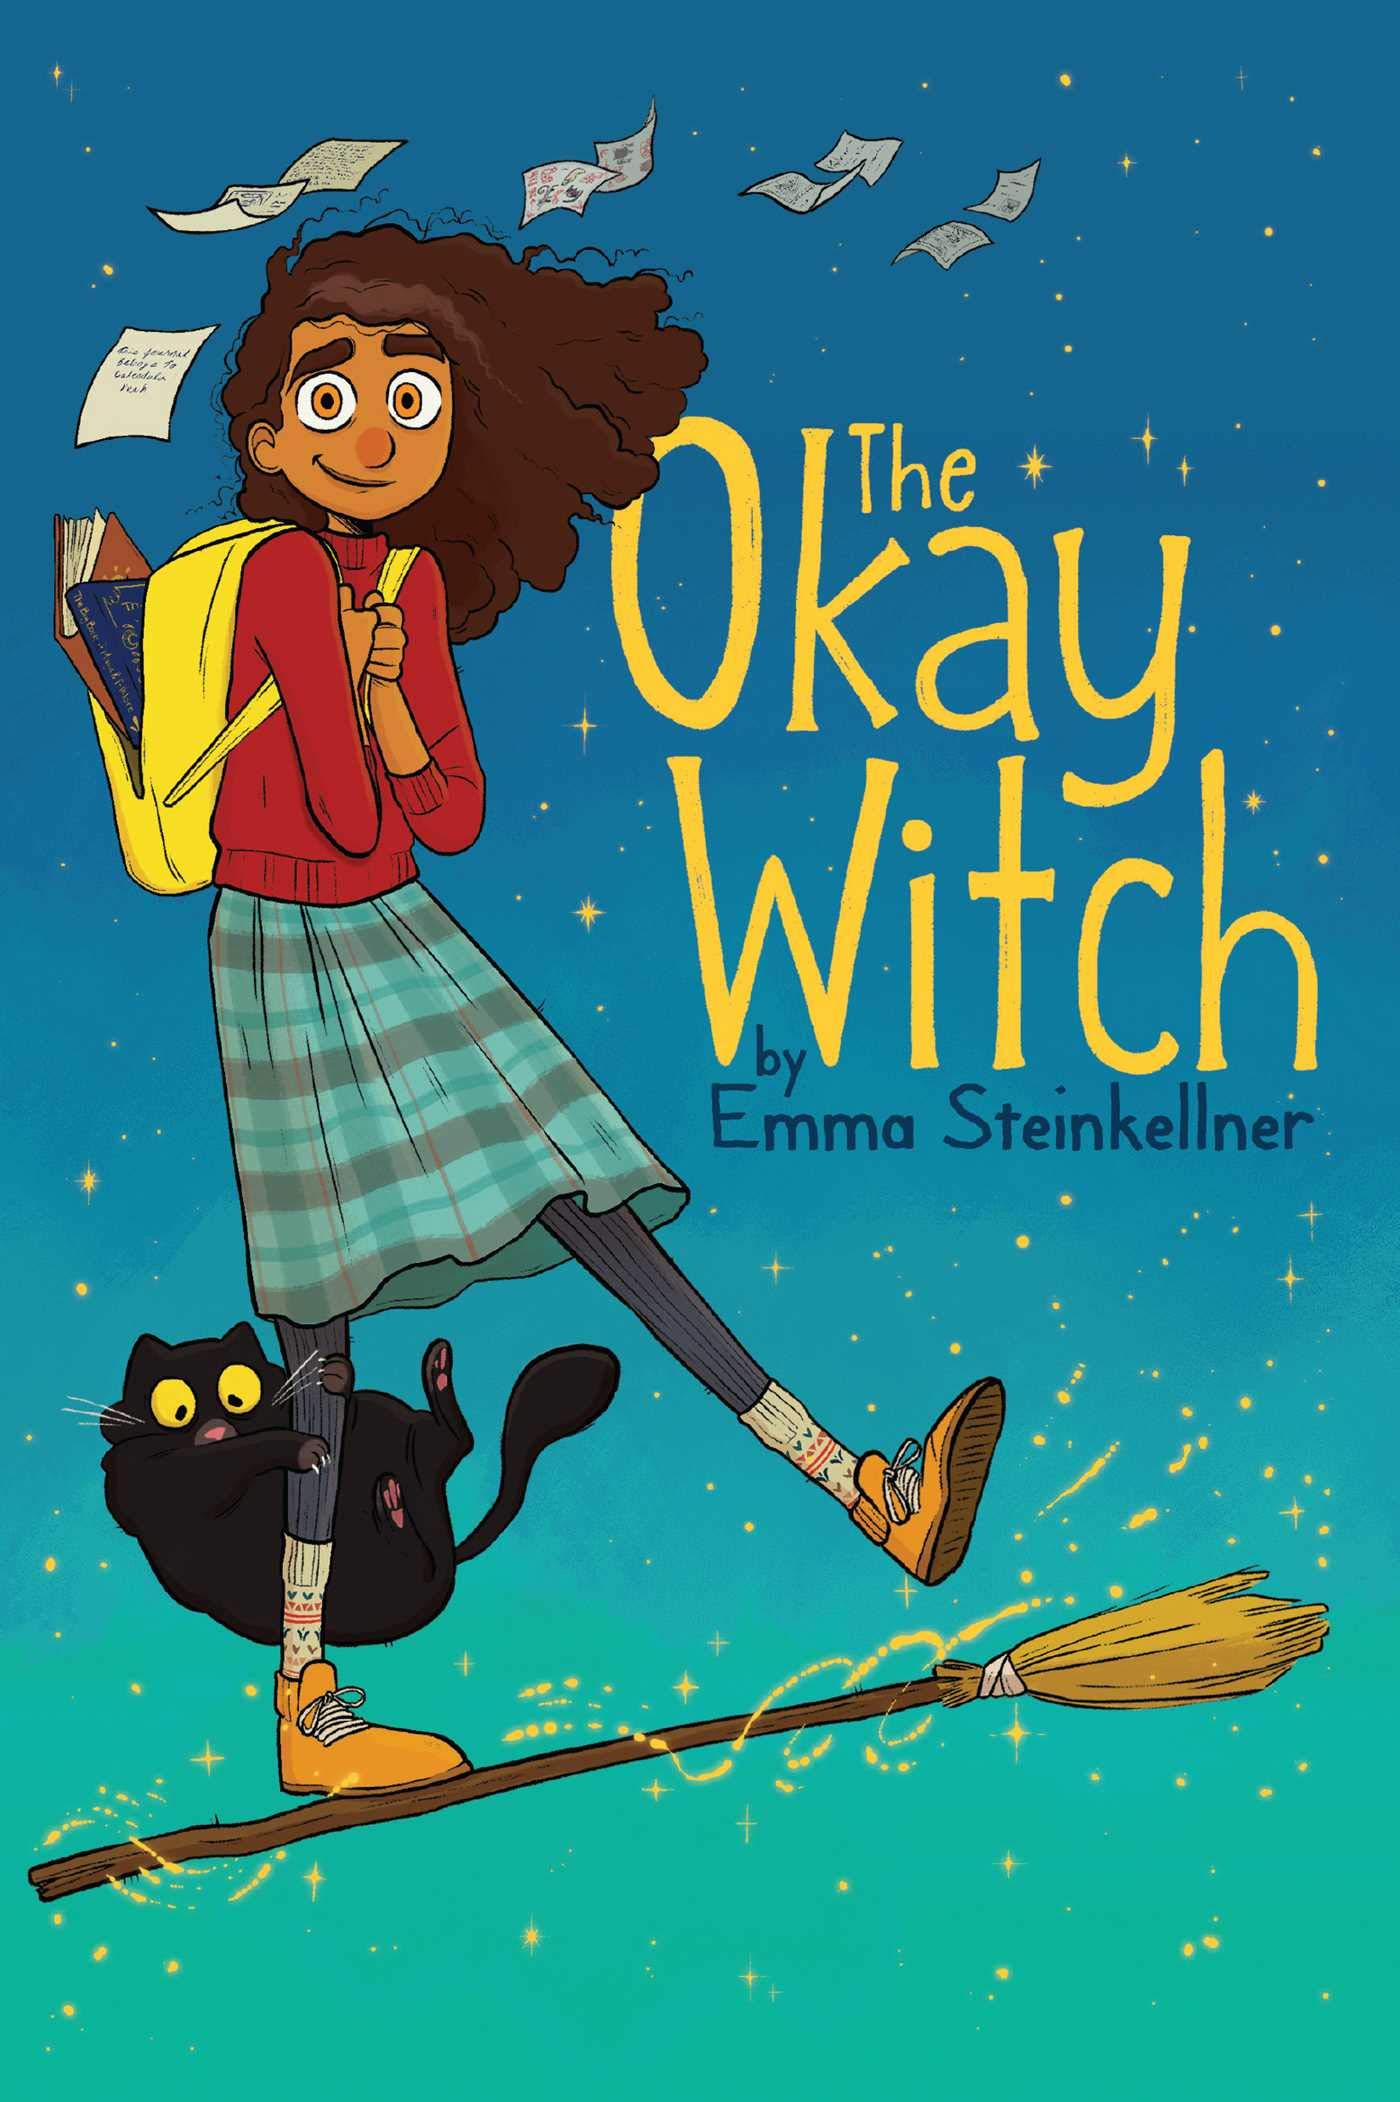 image for "the okay witch"